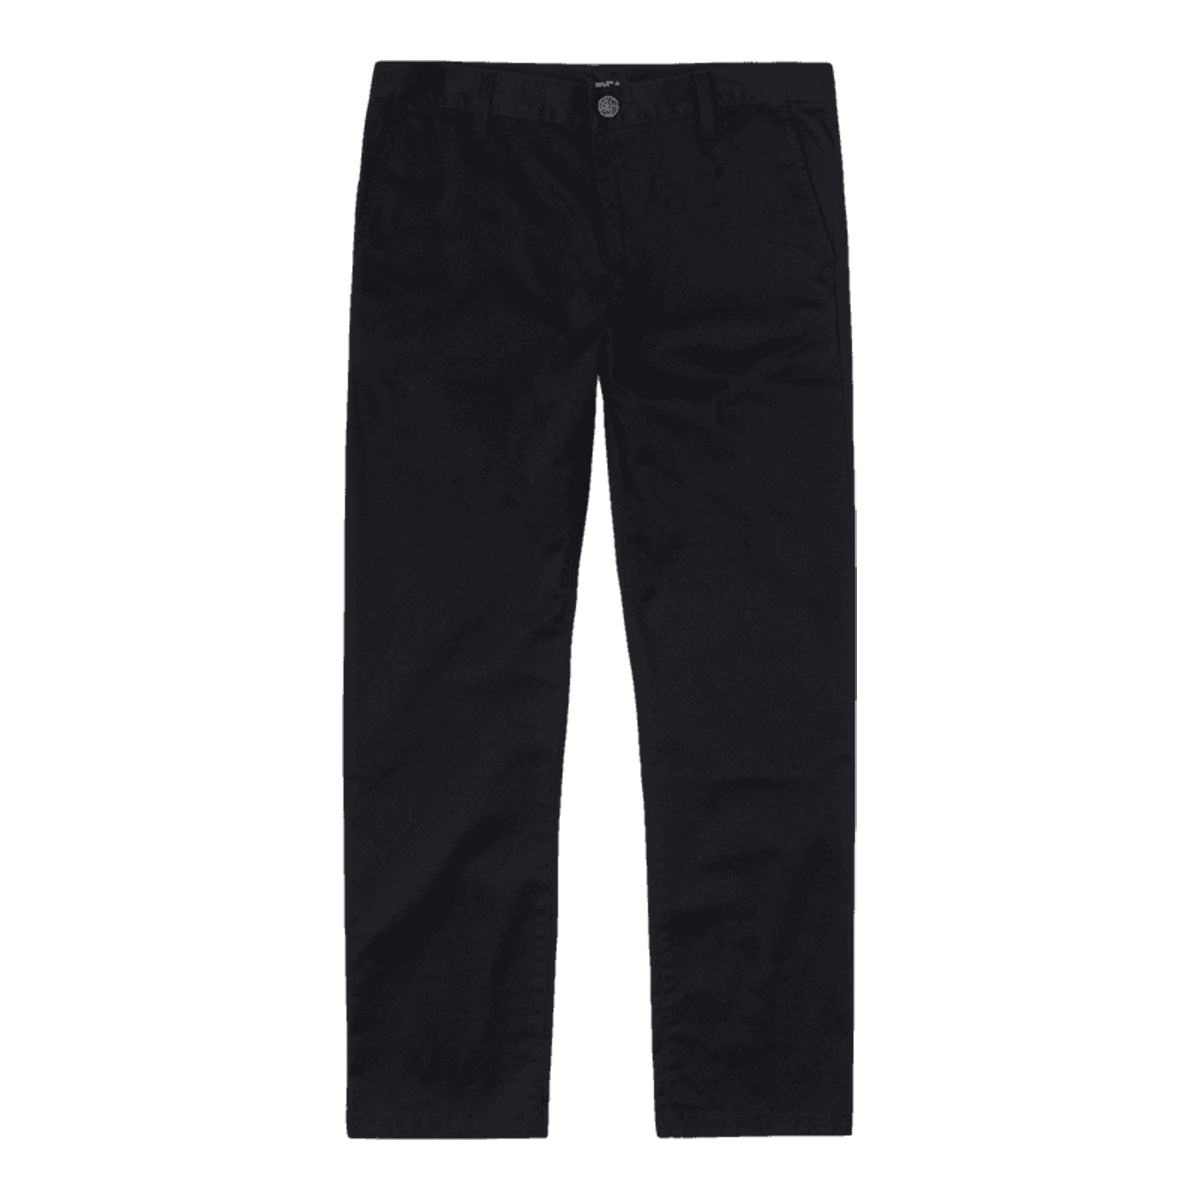 RVCA The Weekend Stretch Pant in Black